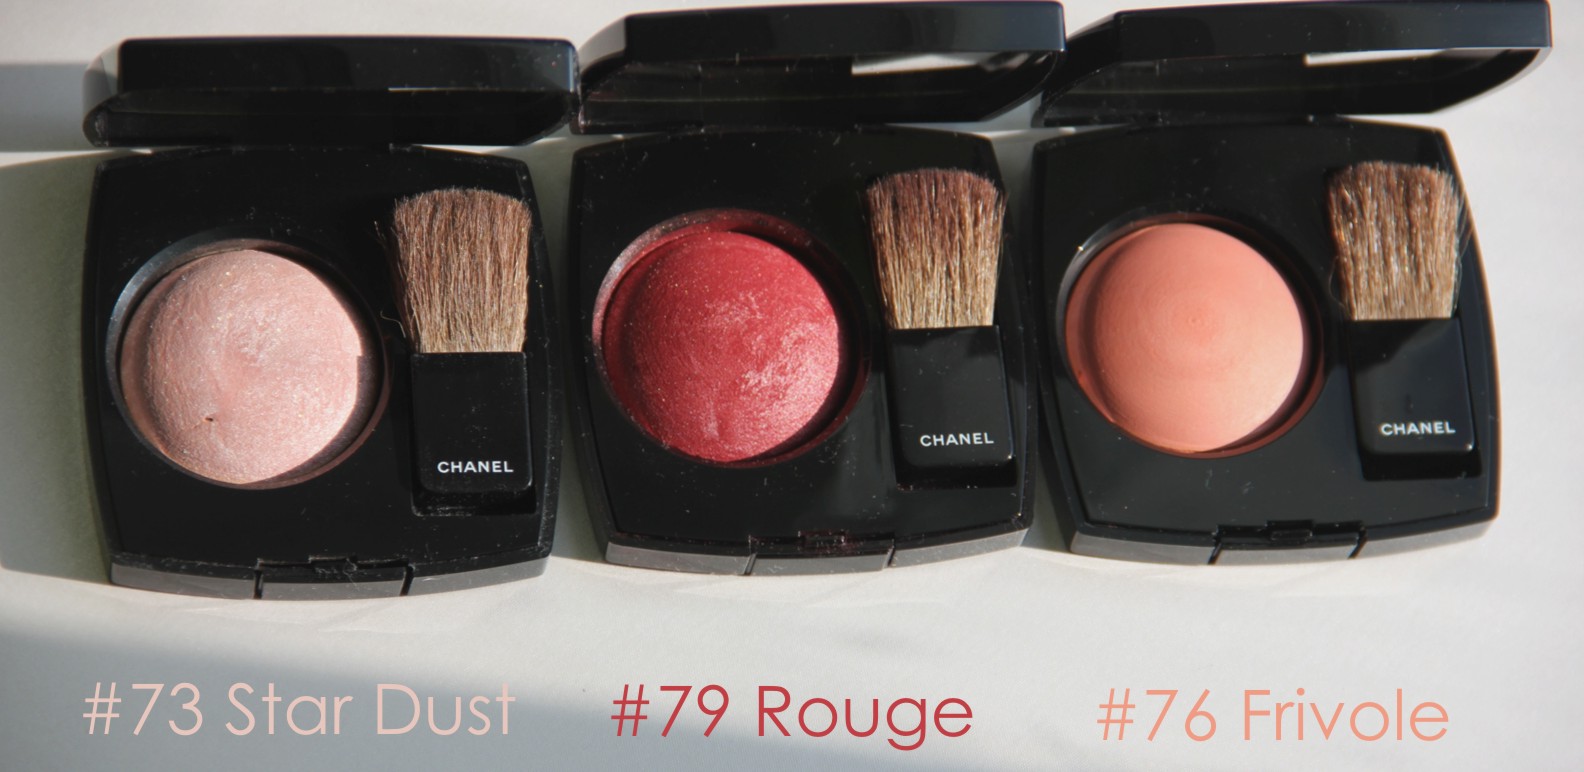 Chanel: joues contraste. from left to right: 96 caprice, 13 candy